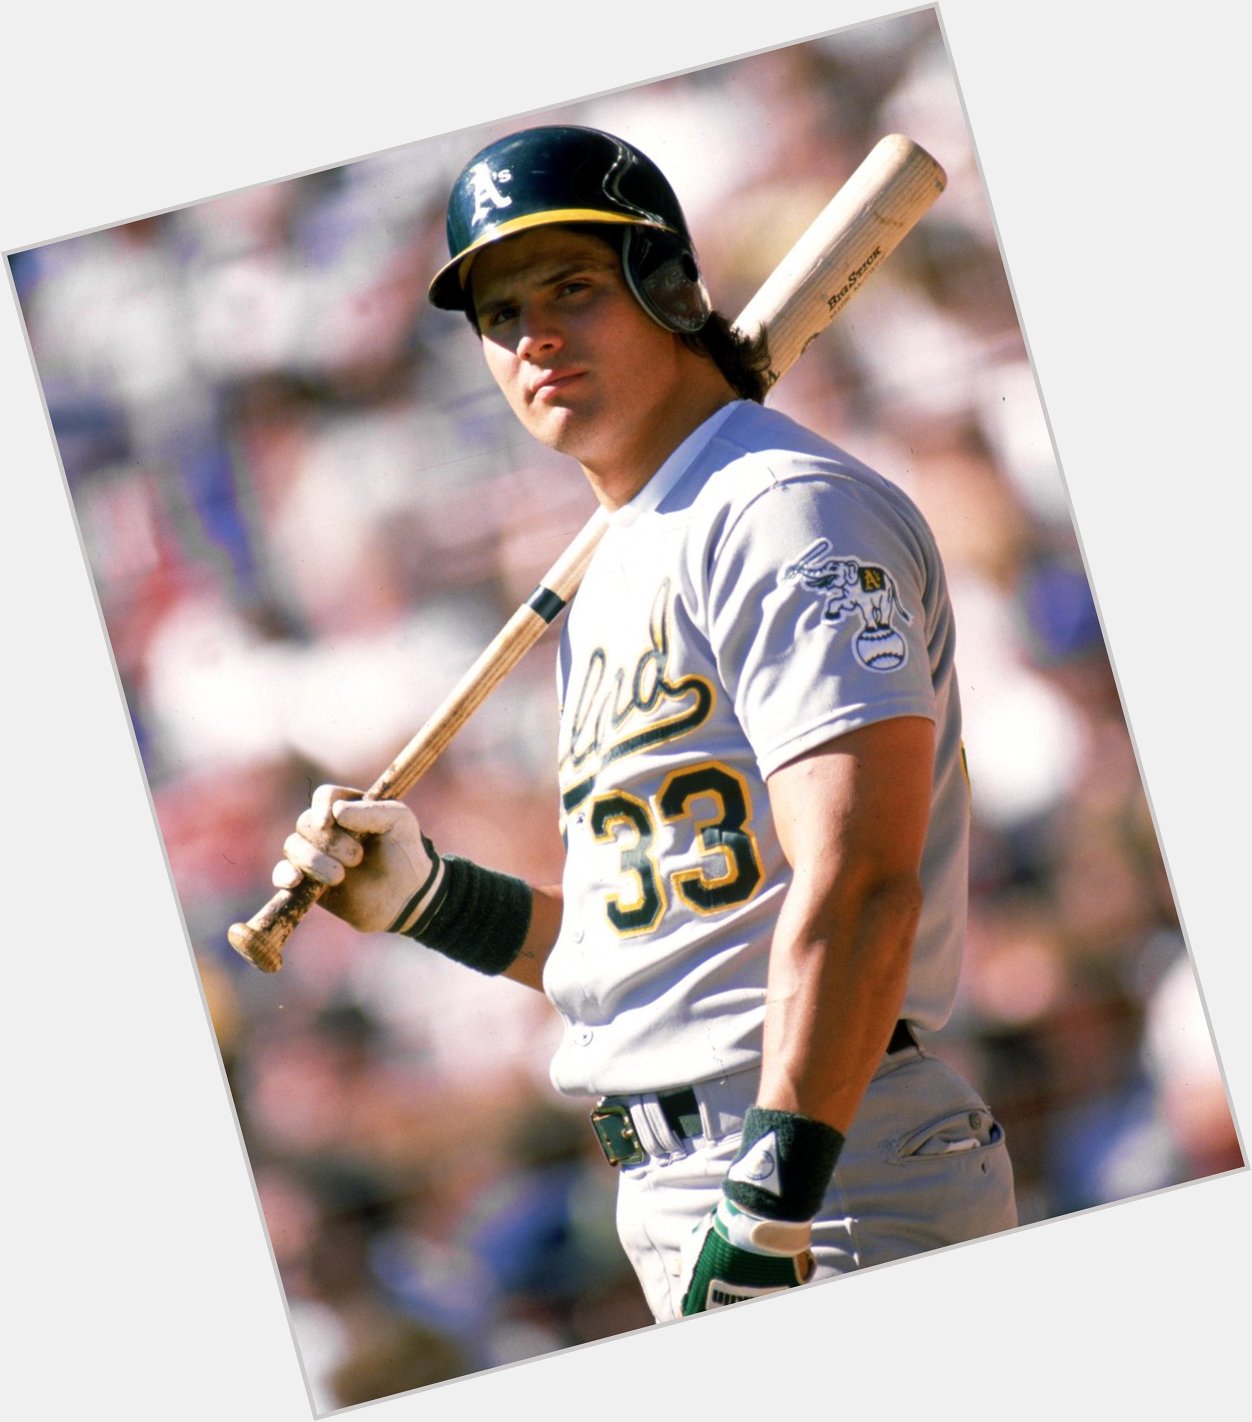 Happy Birthday to Jose Canseco, who turns 51 today! 